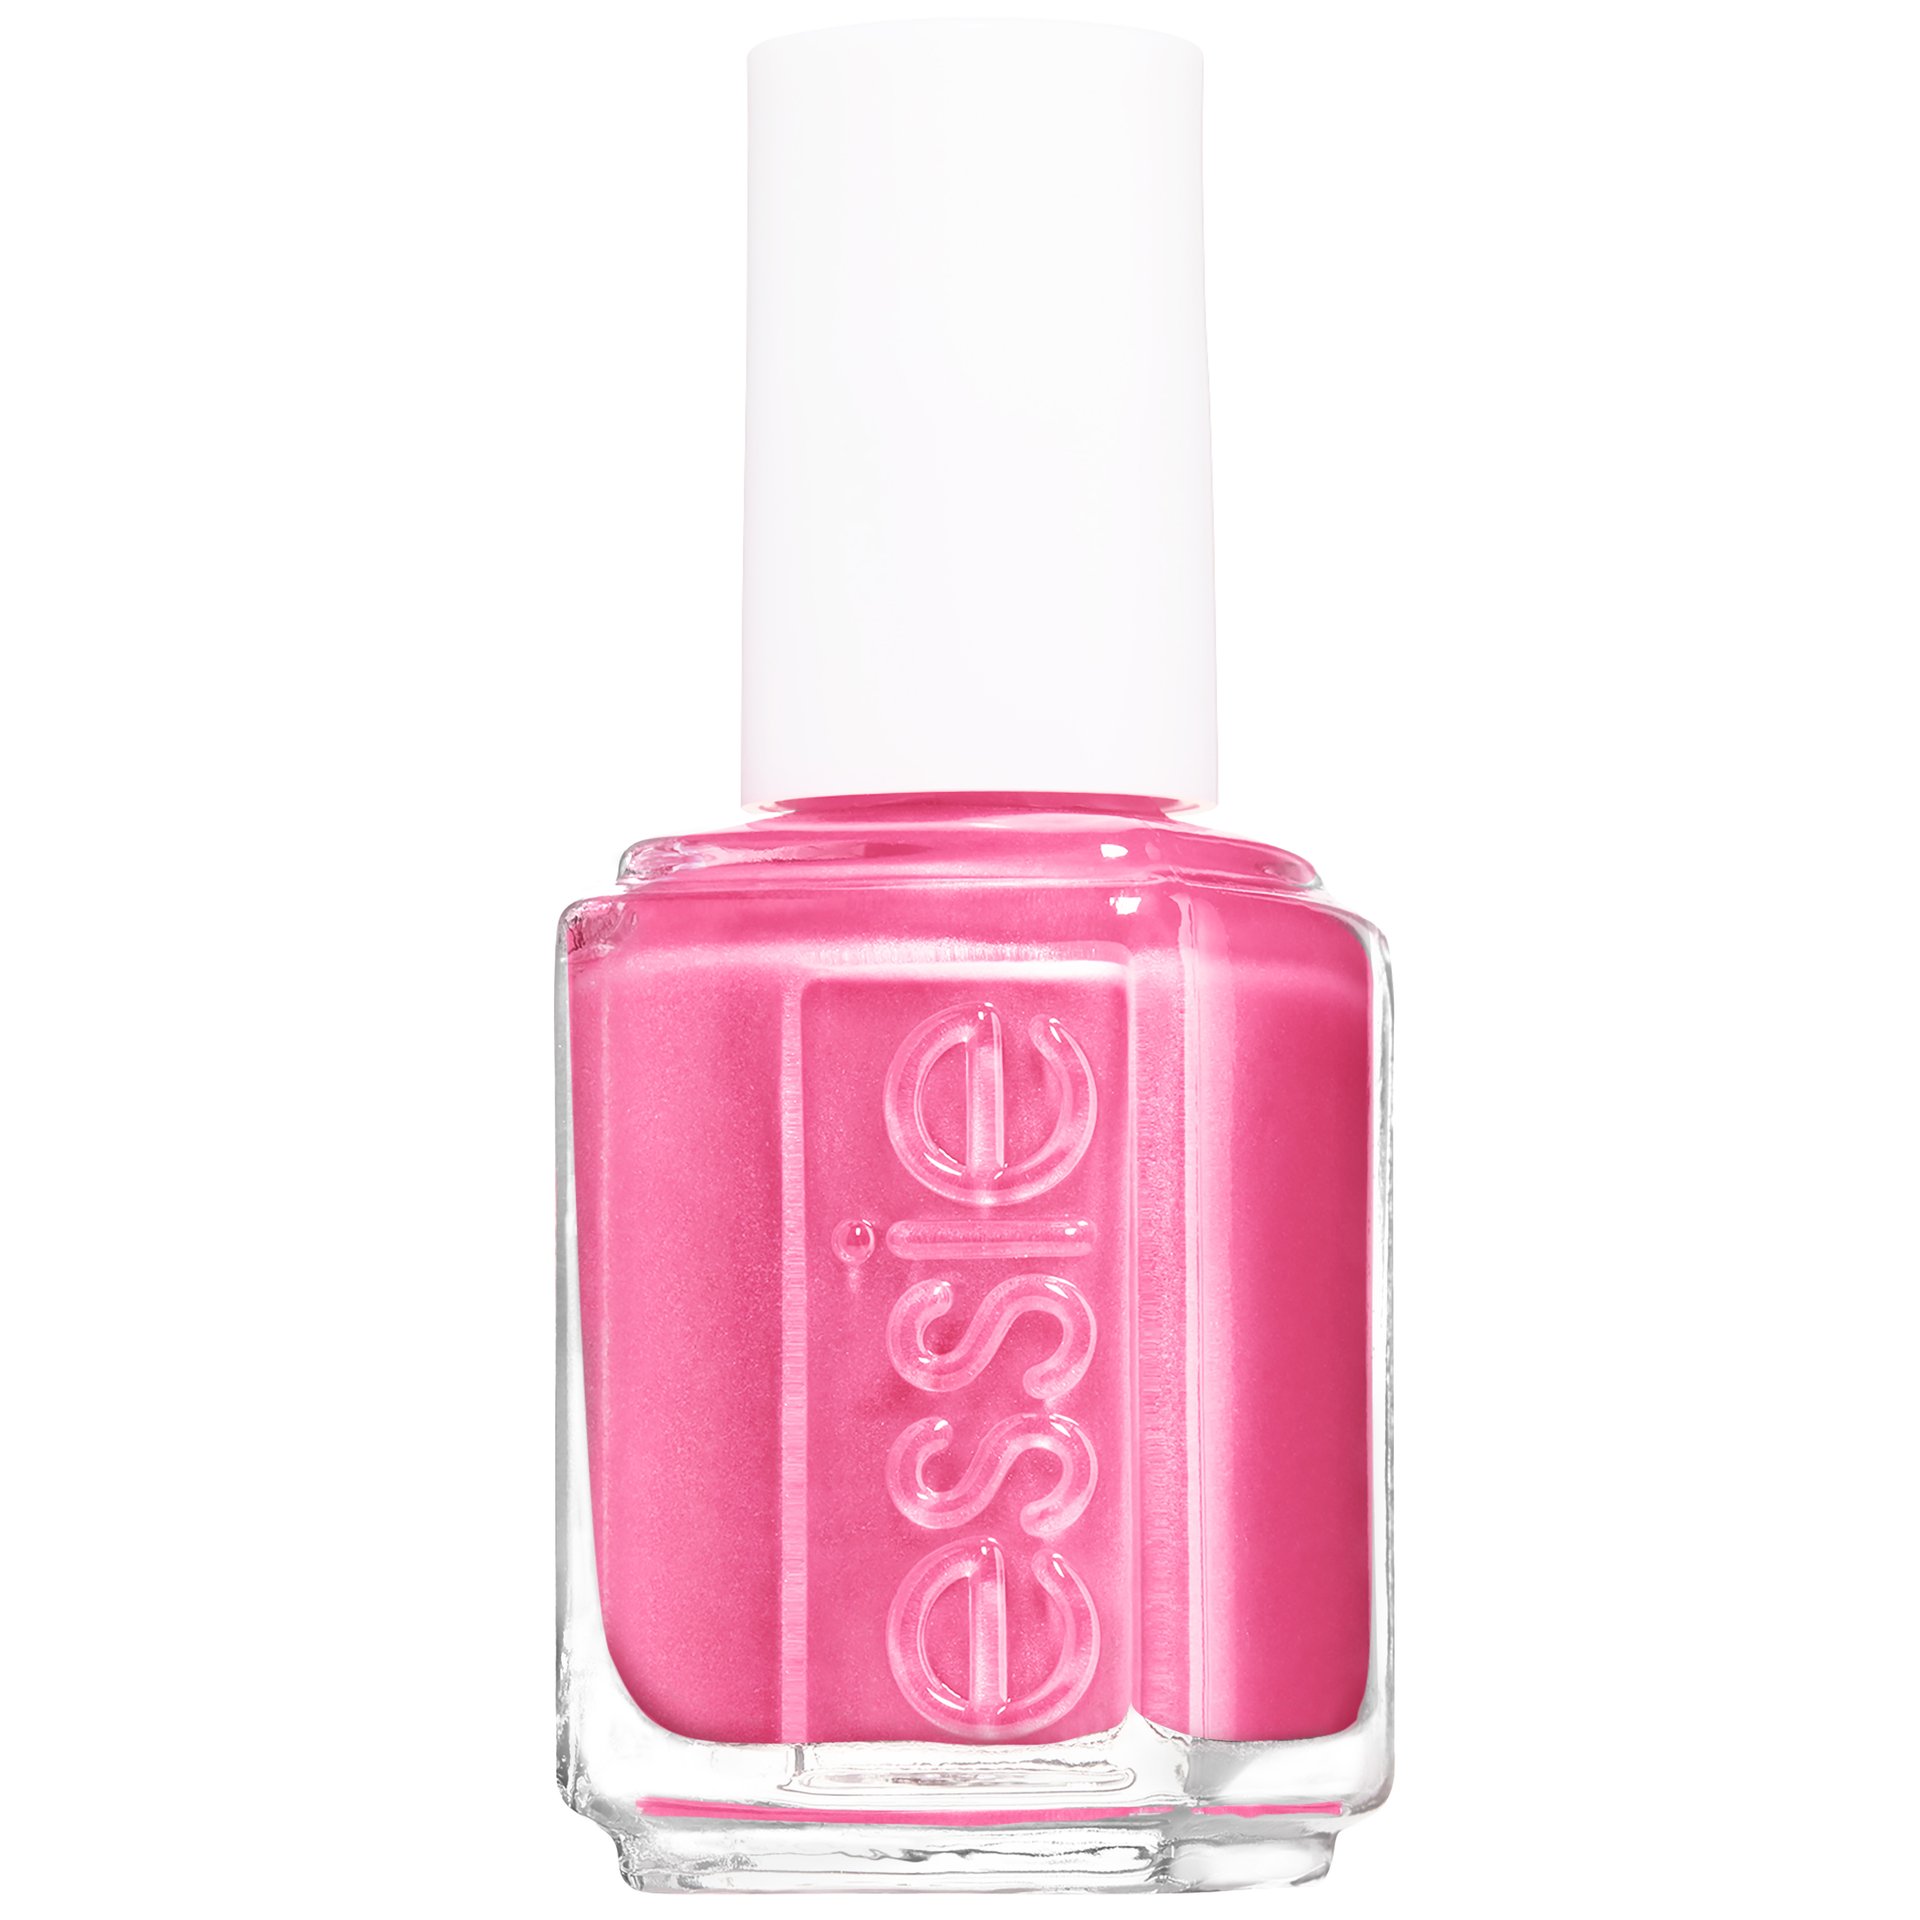 ESSIE-Enamel-babes-in-the-booth-nail-polish-bottle